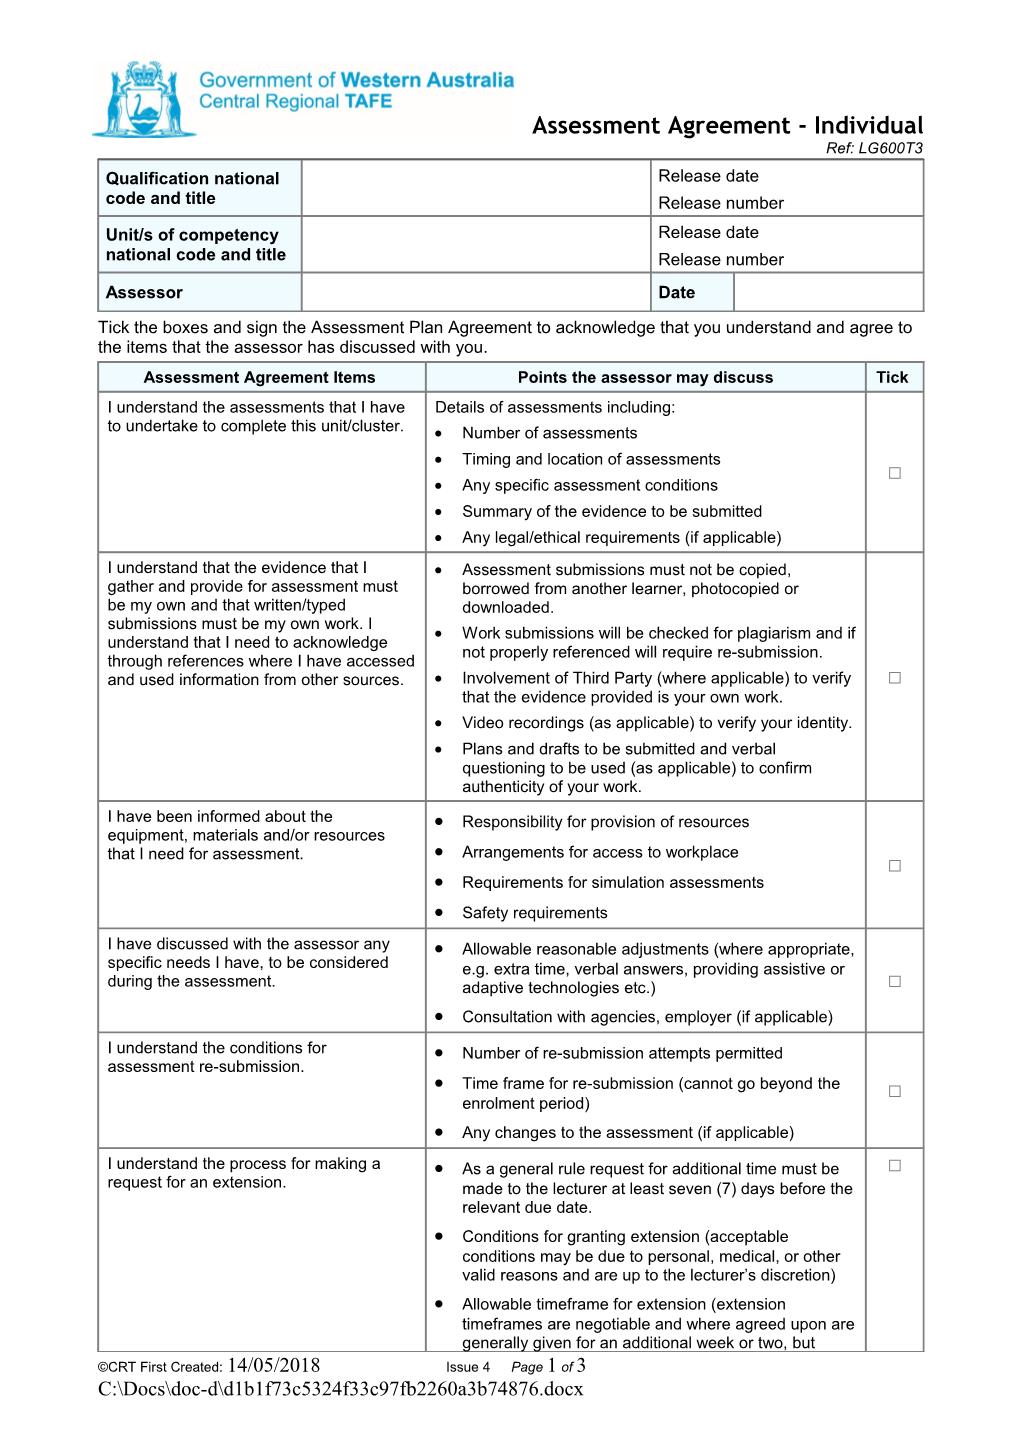 Assessment Agreement Individual